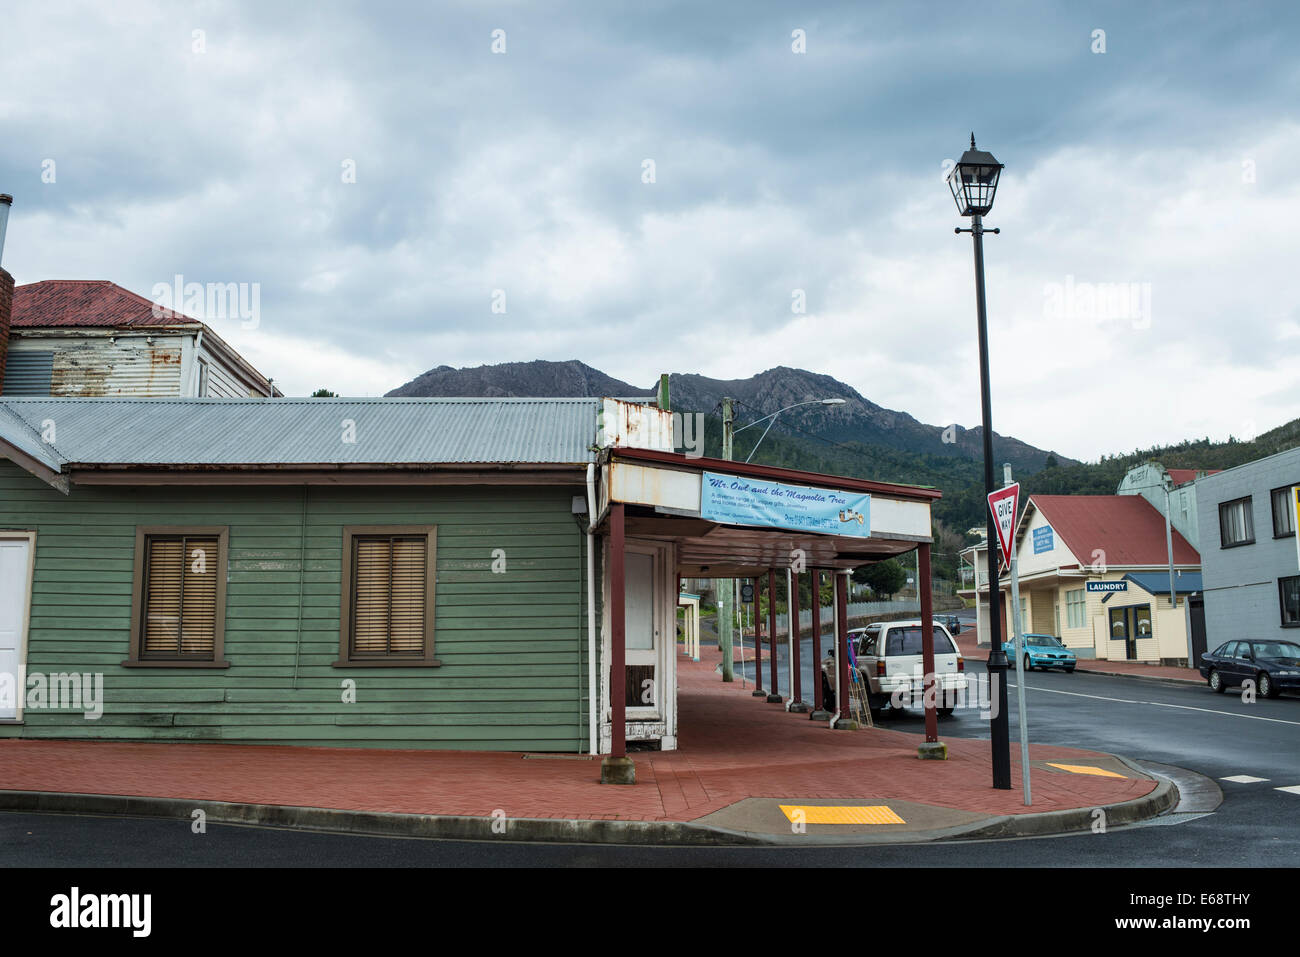 Paysage, Queenstown, New Caledonia Banque D'Images